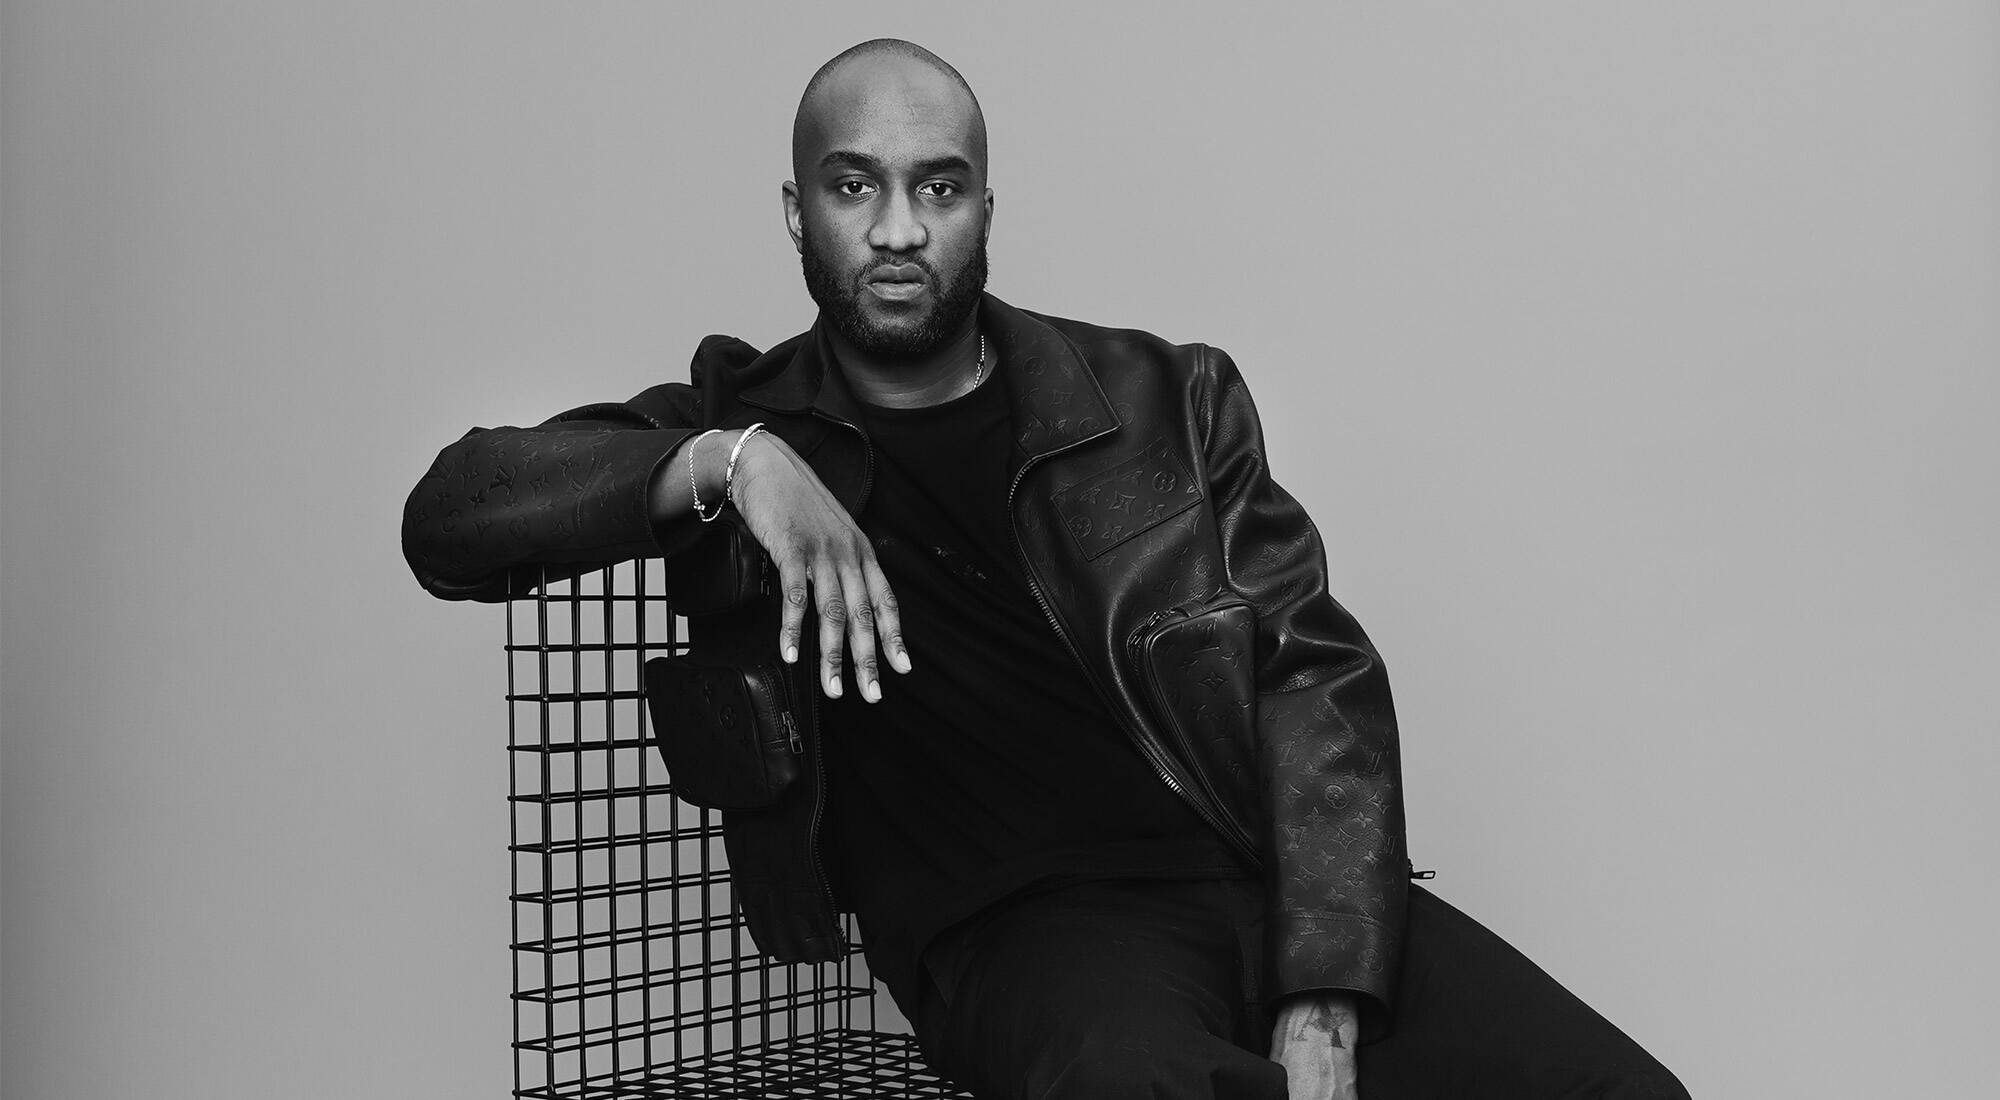 Louis Vuitton: Virgil Abloh' Is An Ode To The Late Designer's Works